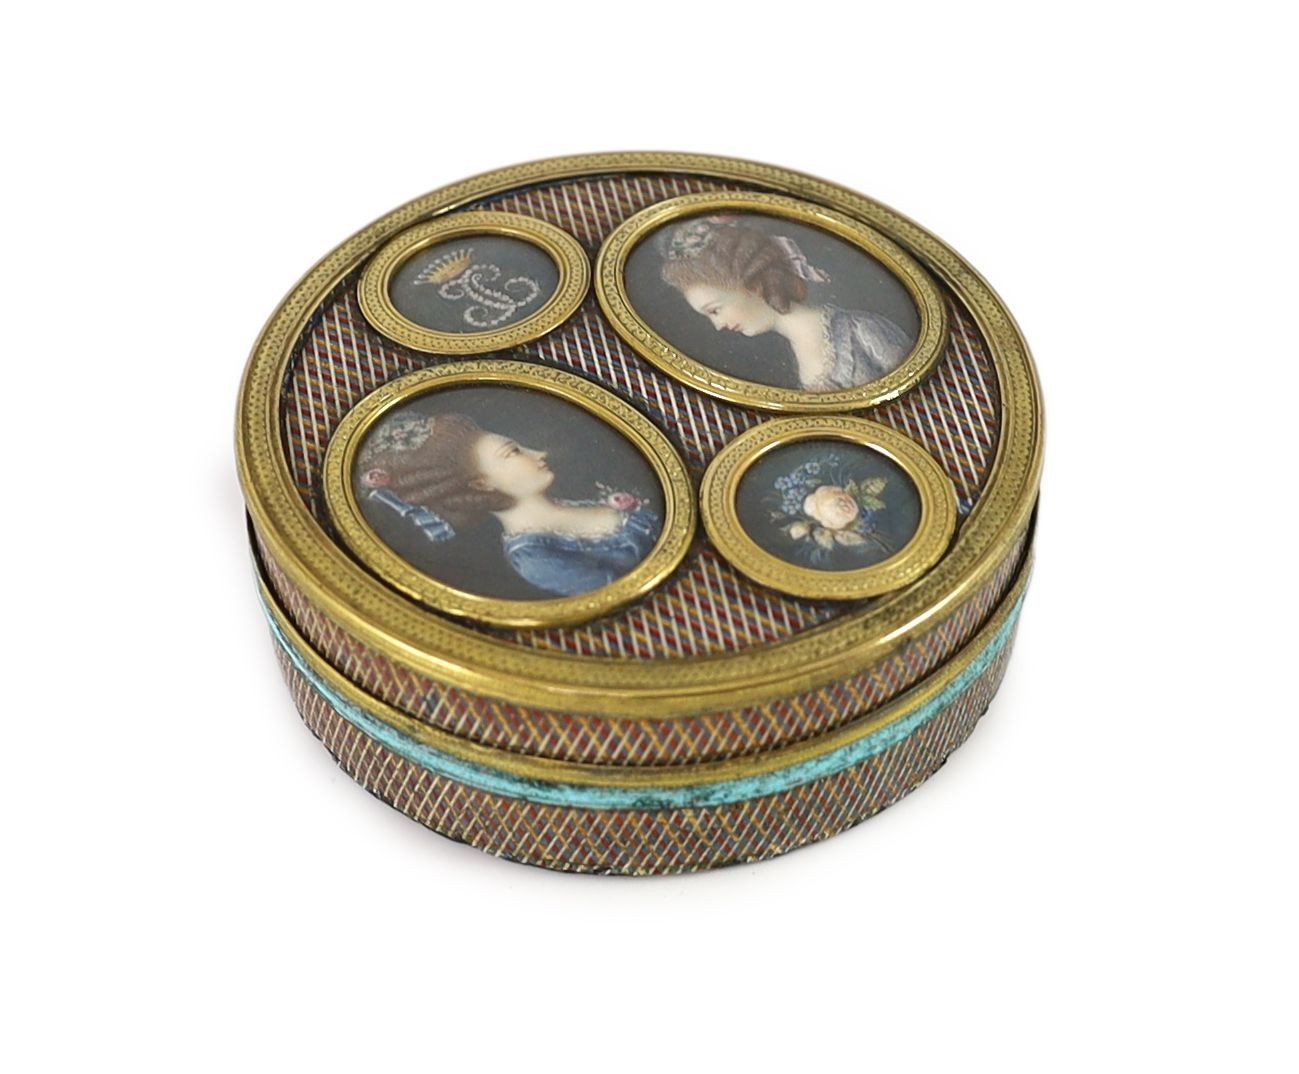 A late 18th century tortoiseshell poudre d'écaille box, the cover inset with two portraits of young ladies, below a monogram ‘JC’ with coronet, mounted in gilt metal 8cm diameter                                          